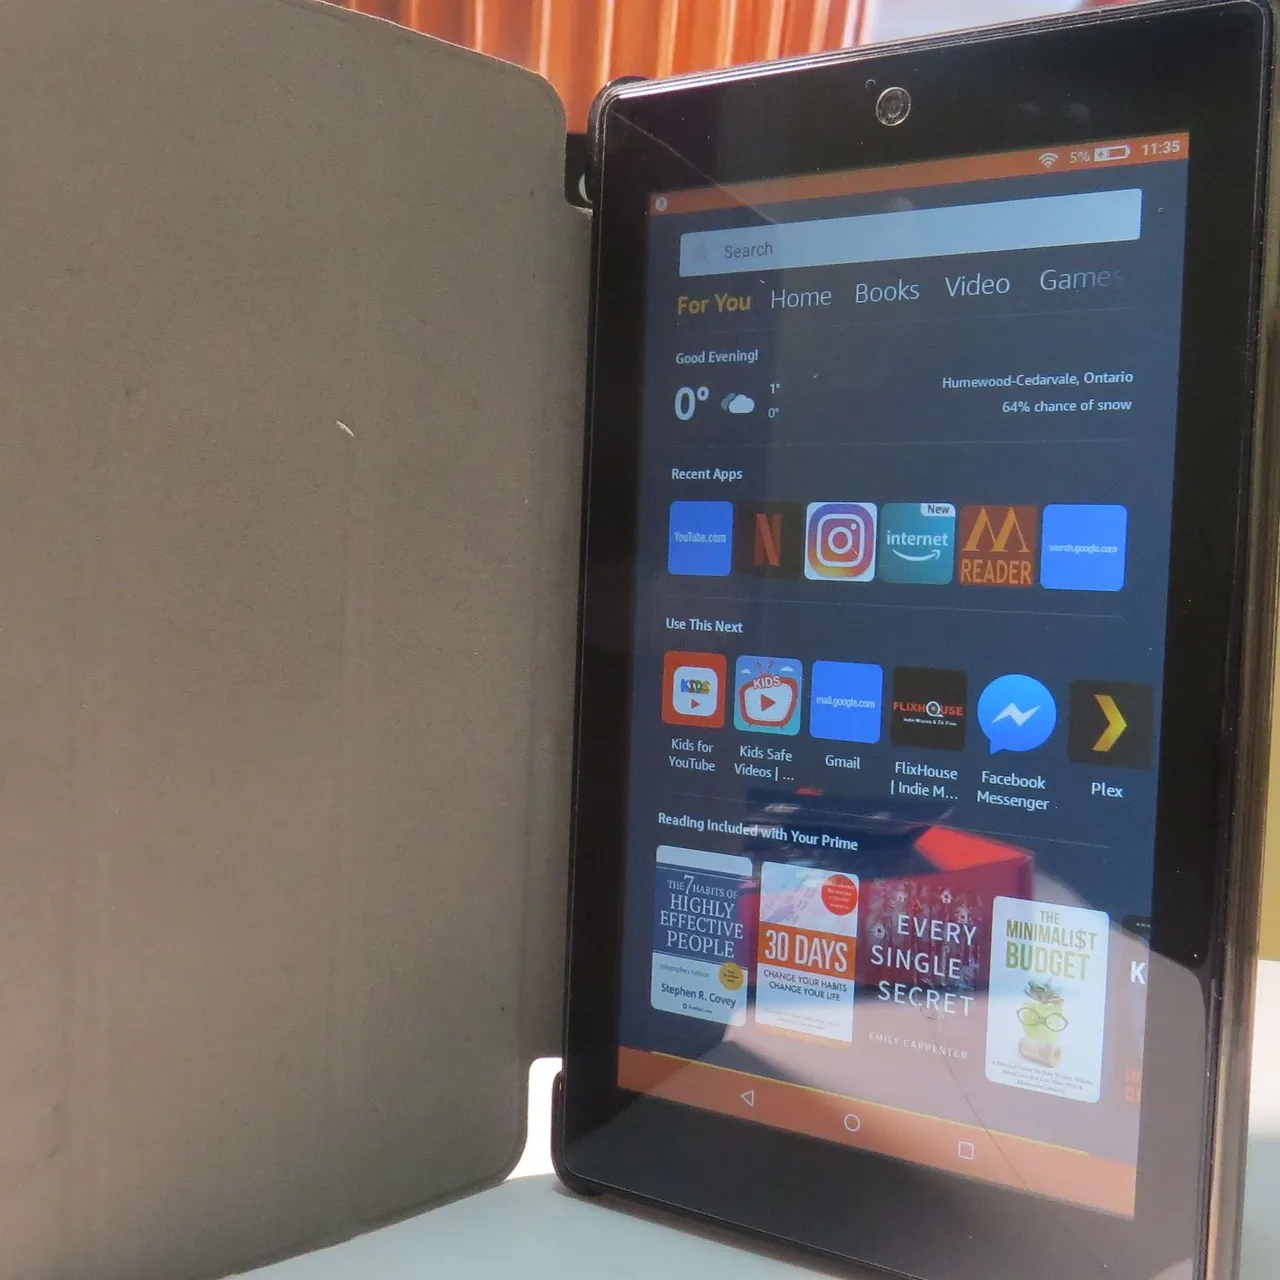 Tablet 7 inches - Amazon Fire 7 Brand New photo 4